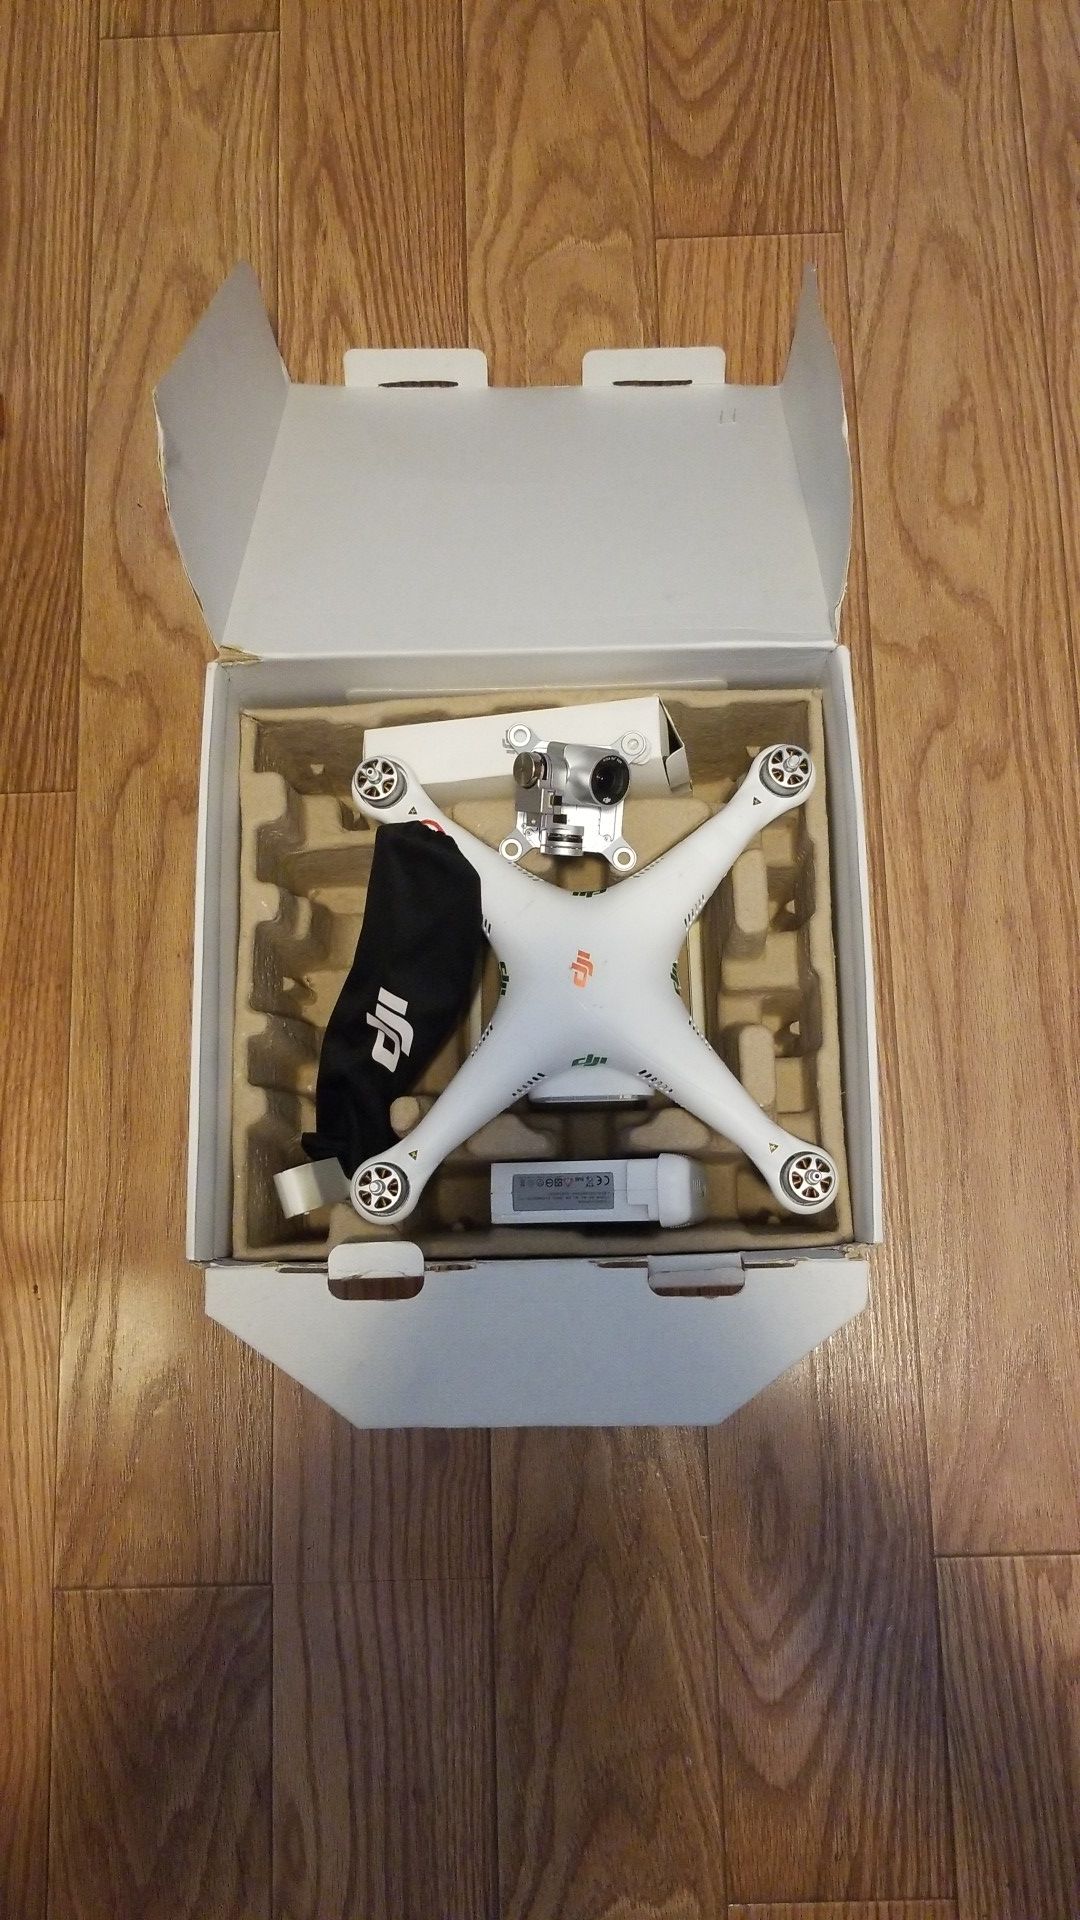 (CashPickup)Phantom 3 Standard DOES NOT Come With a Controller/Cable on the Drone That Connects The Camera to it Is Cut But is Fixable